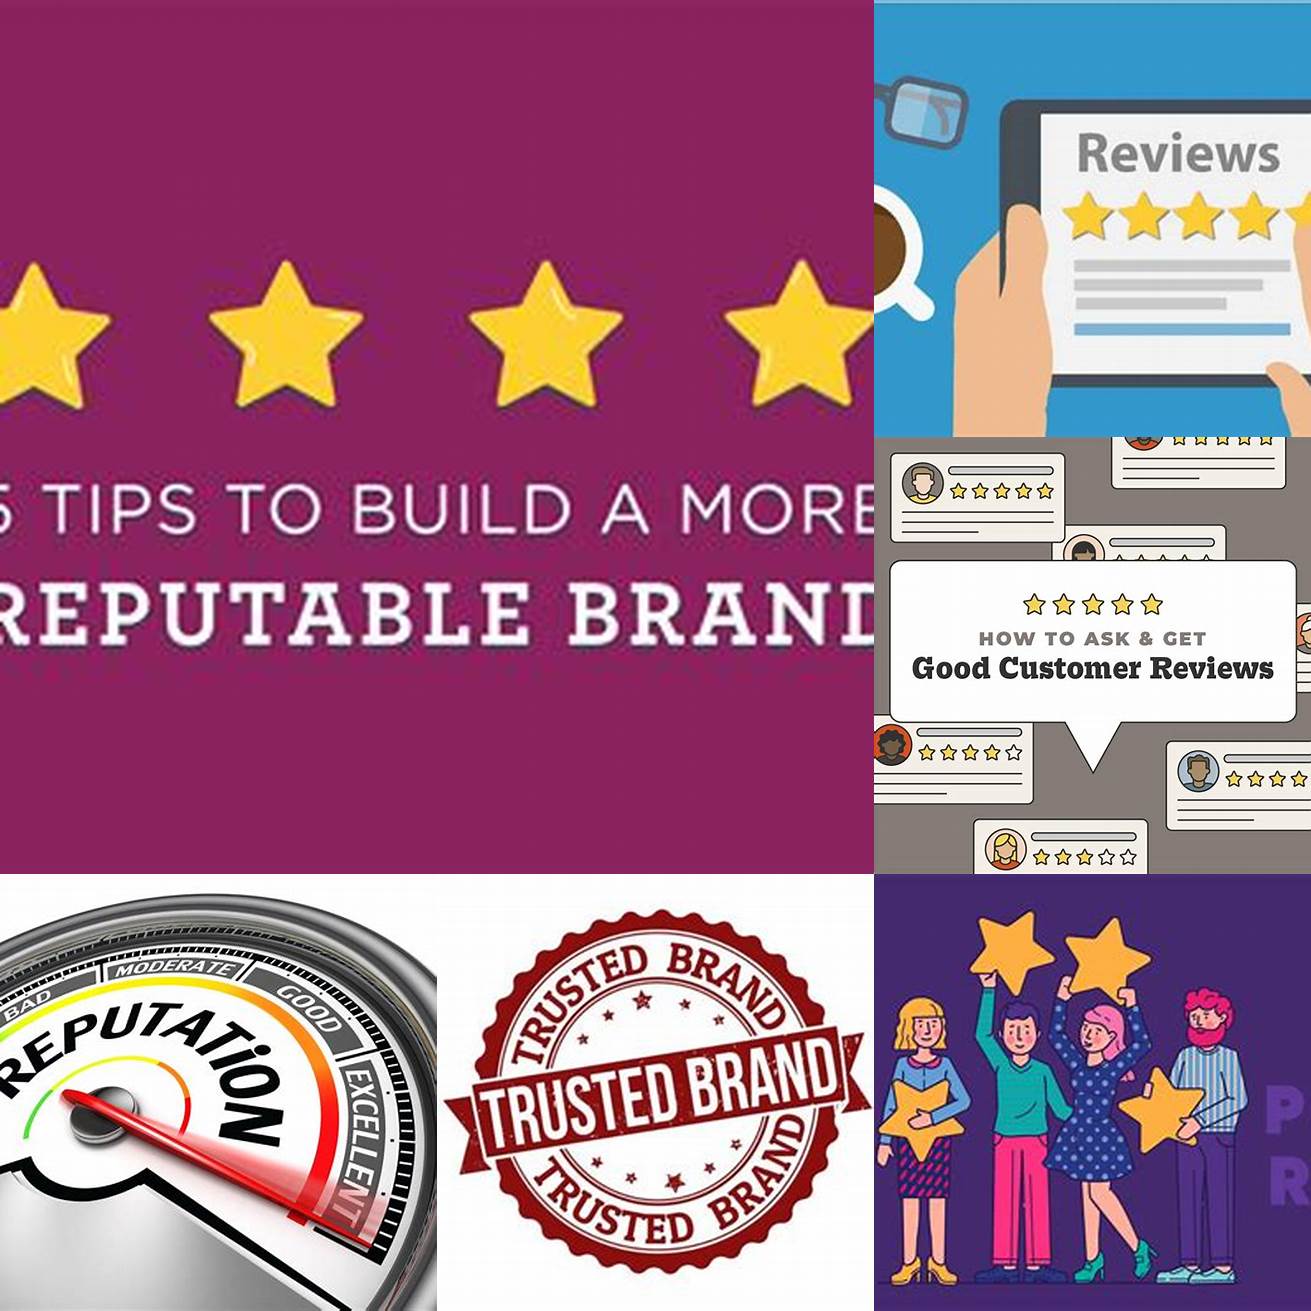 Choose a reputable brand with good customer reviews and a solid warranty